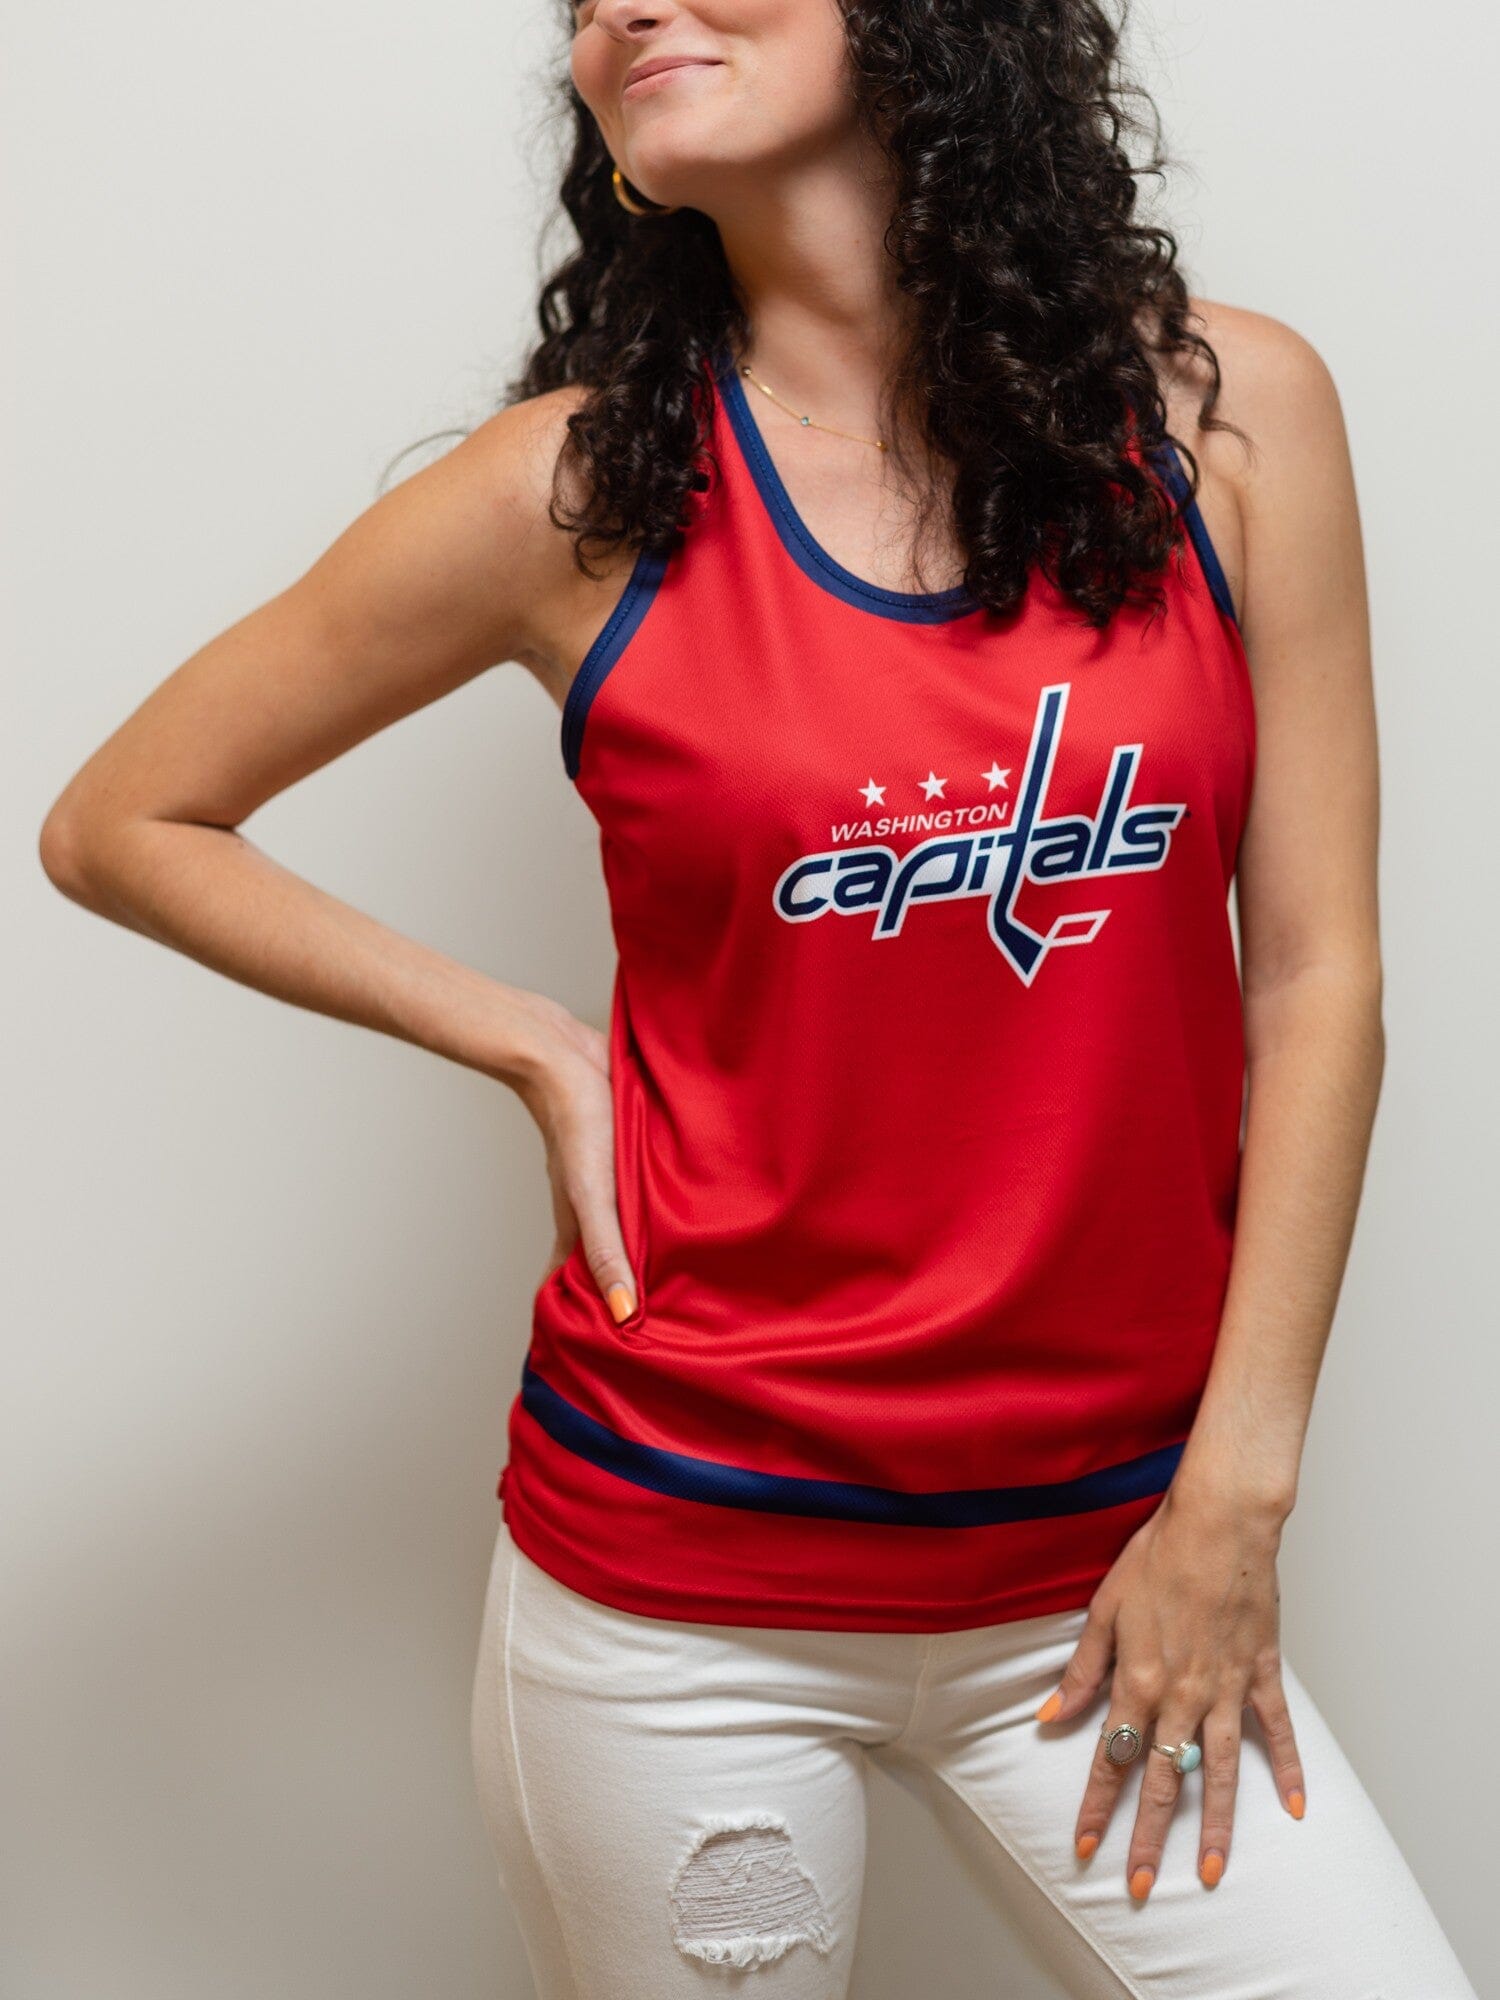 Bench Clearers Washington Capitals Hockey Tank - L / Red / Polyester